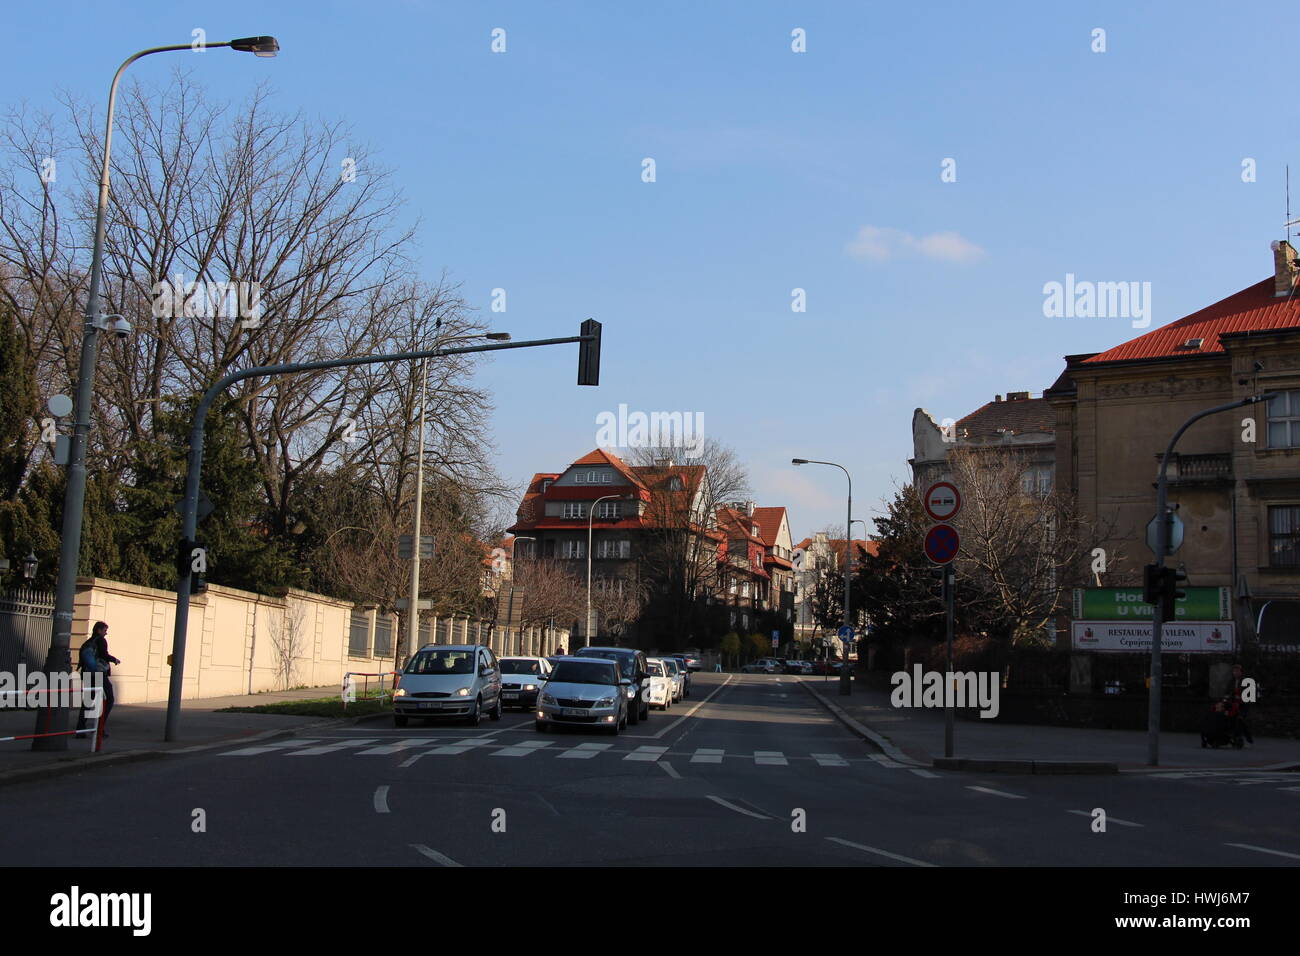 A scene on a road in Hradčanská, Prague - it is a lovely, orderly place with nice buildings. Stock Photo